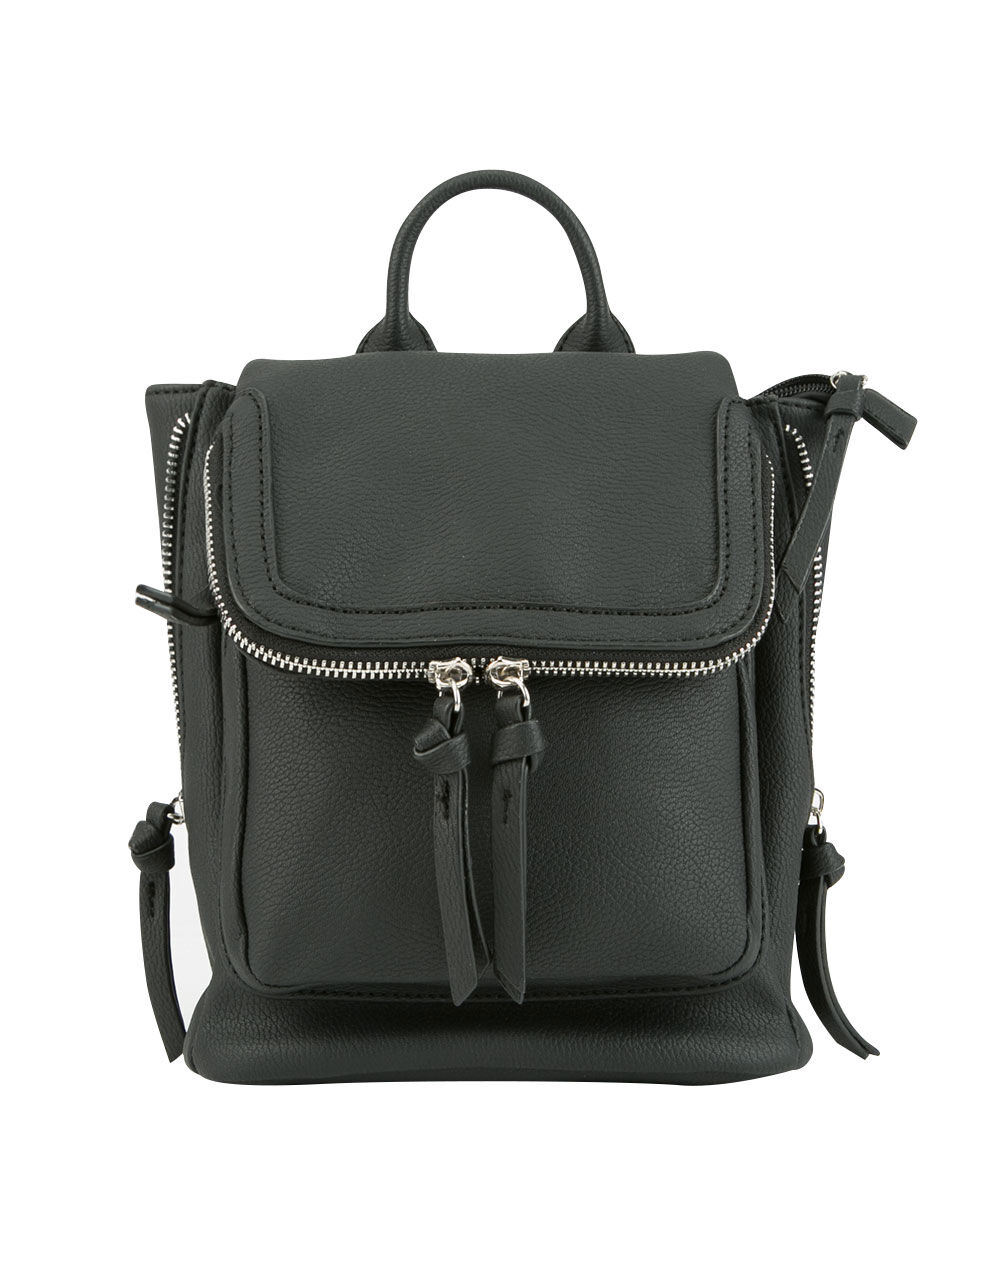 VIOLET RAY KENDALL MINI BACKPACK